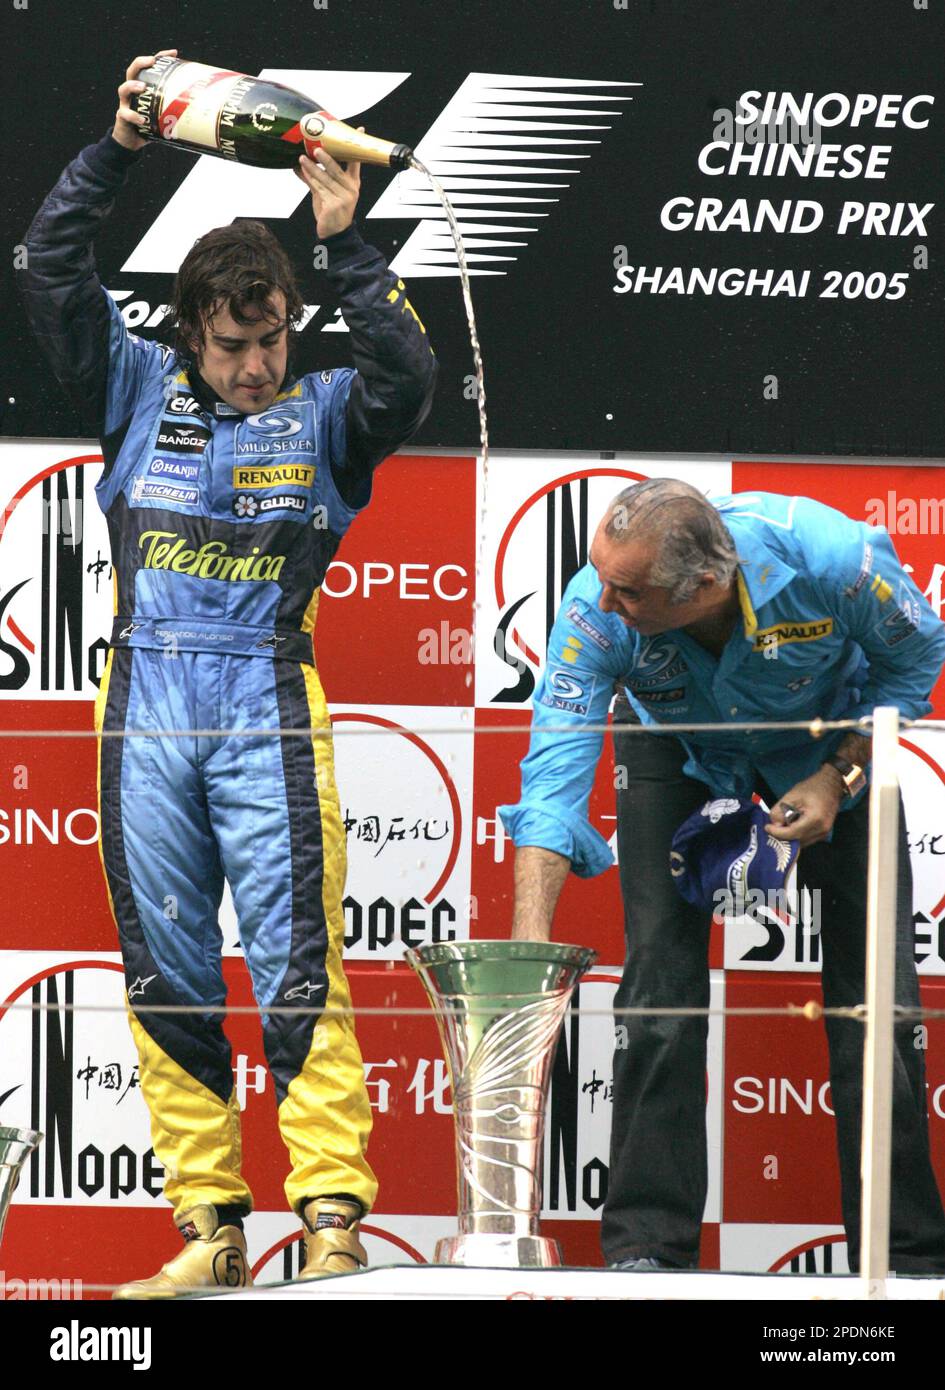 Spanish Formula One world champion Fernando Alonso, left, pours champagne to the Formula One constructors championship trophy on the podium as Renault team director Flavio Briatore looks on during the award ceremony after Alonso won the Chinese Formula One Grand Prix at Shanghai International Circuit, China, Sunday, Oct. 16, 2005. (AP Photo/Ng han Guan) Stockfoto